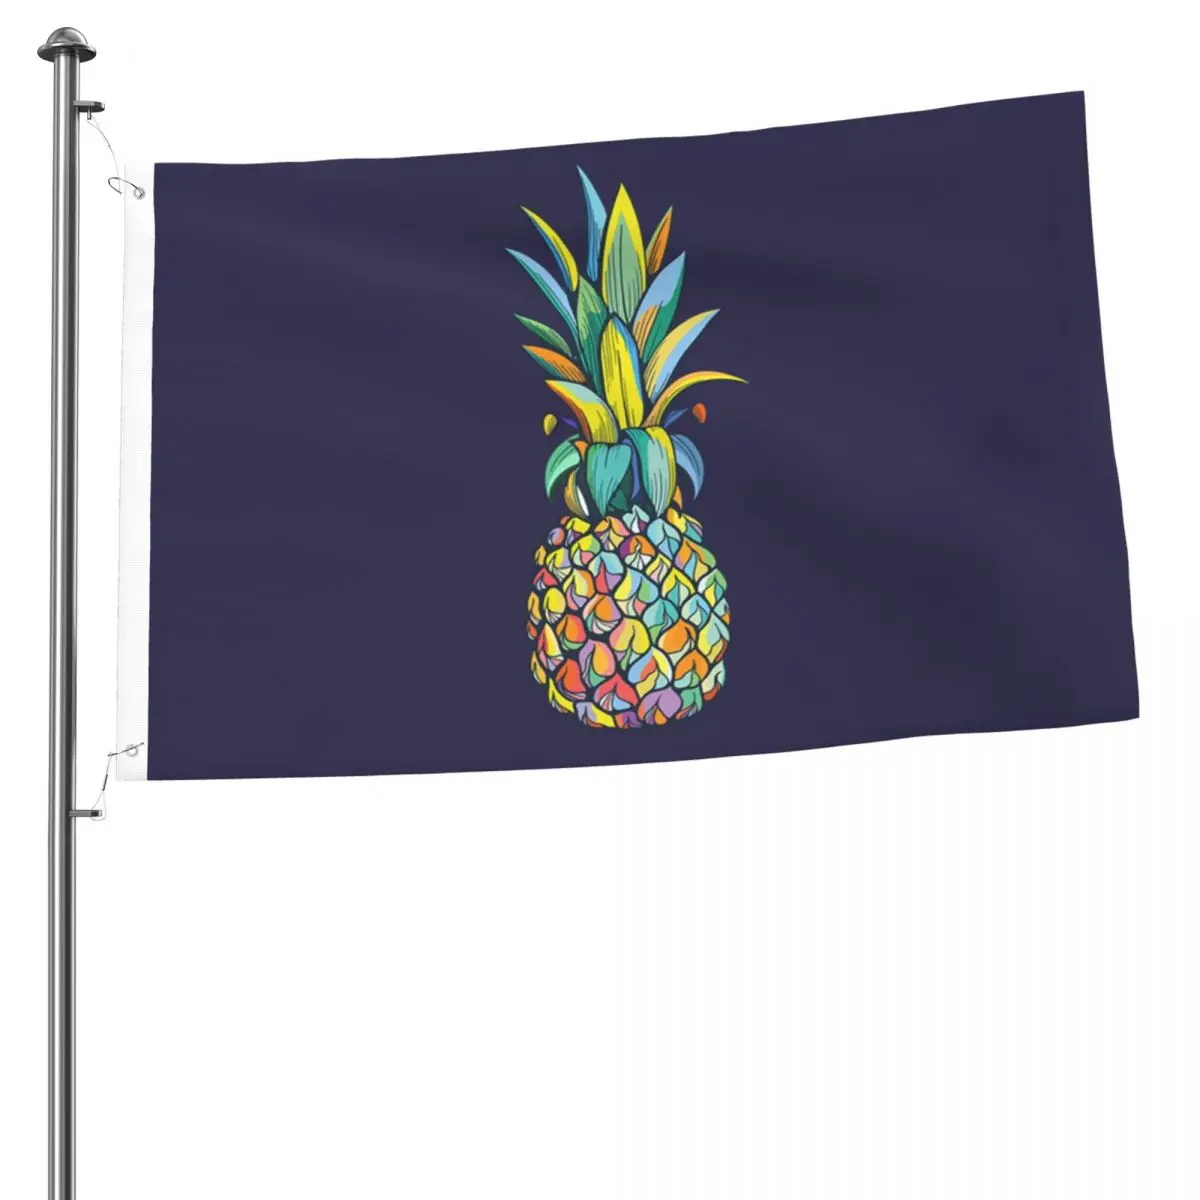 

Colorful Pineapple Outdoor Flag Decorative Banners For Home Decor House Yard Outdoor Party Supplies 2x3ft